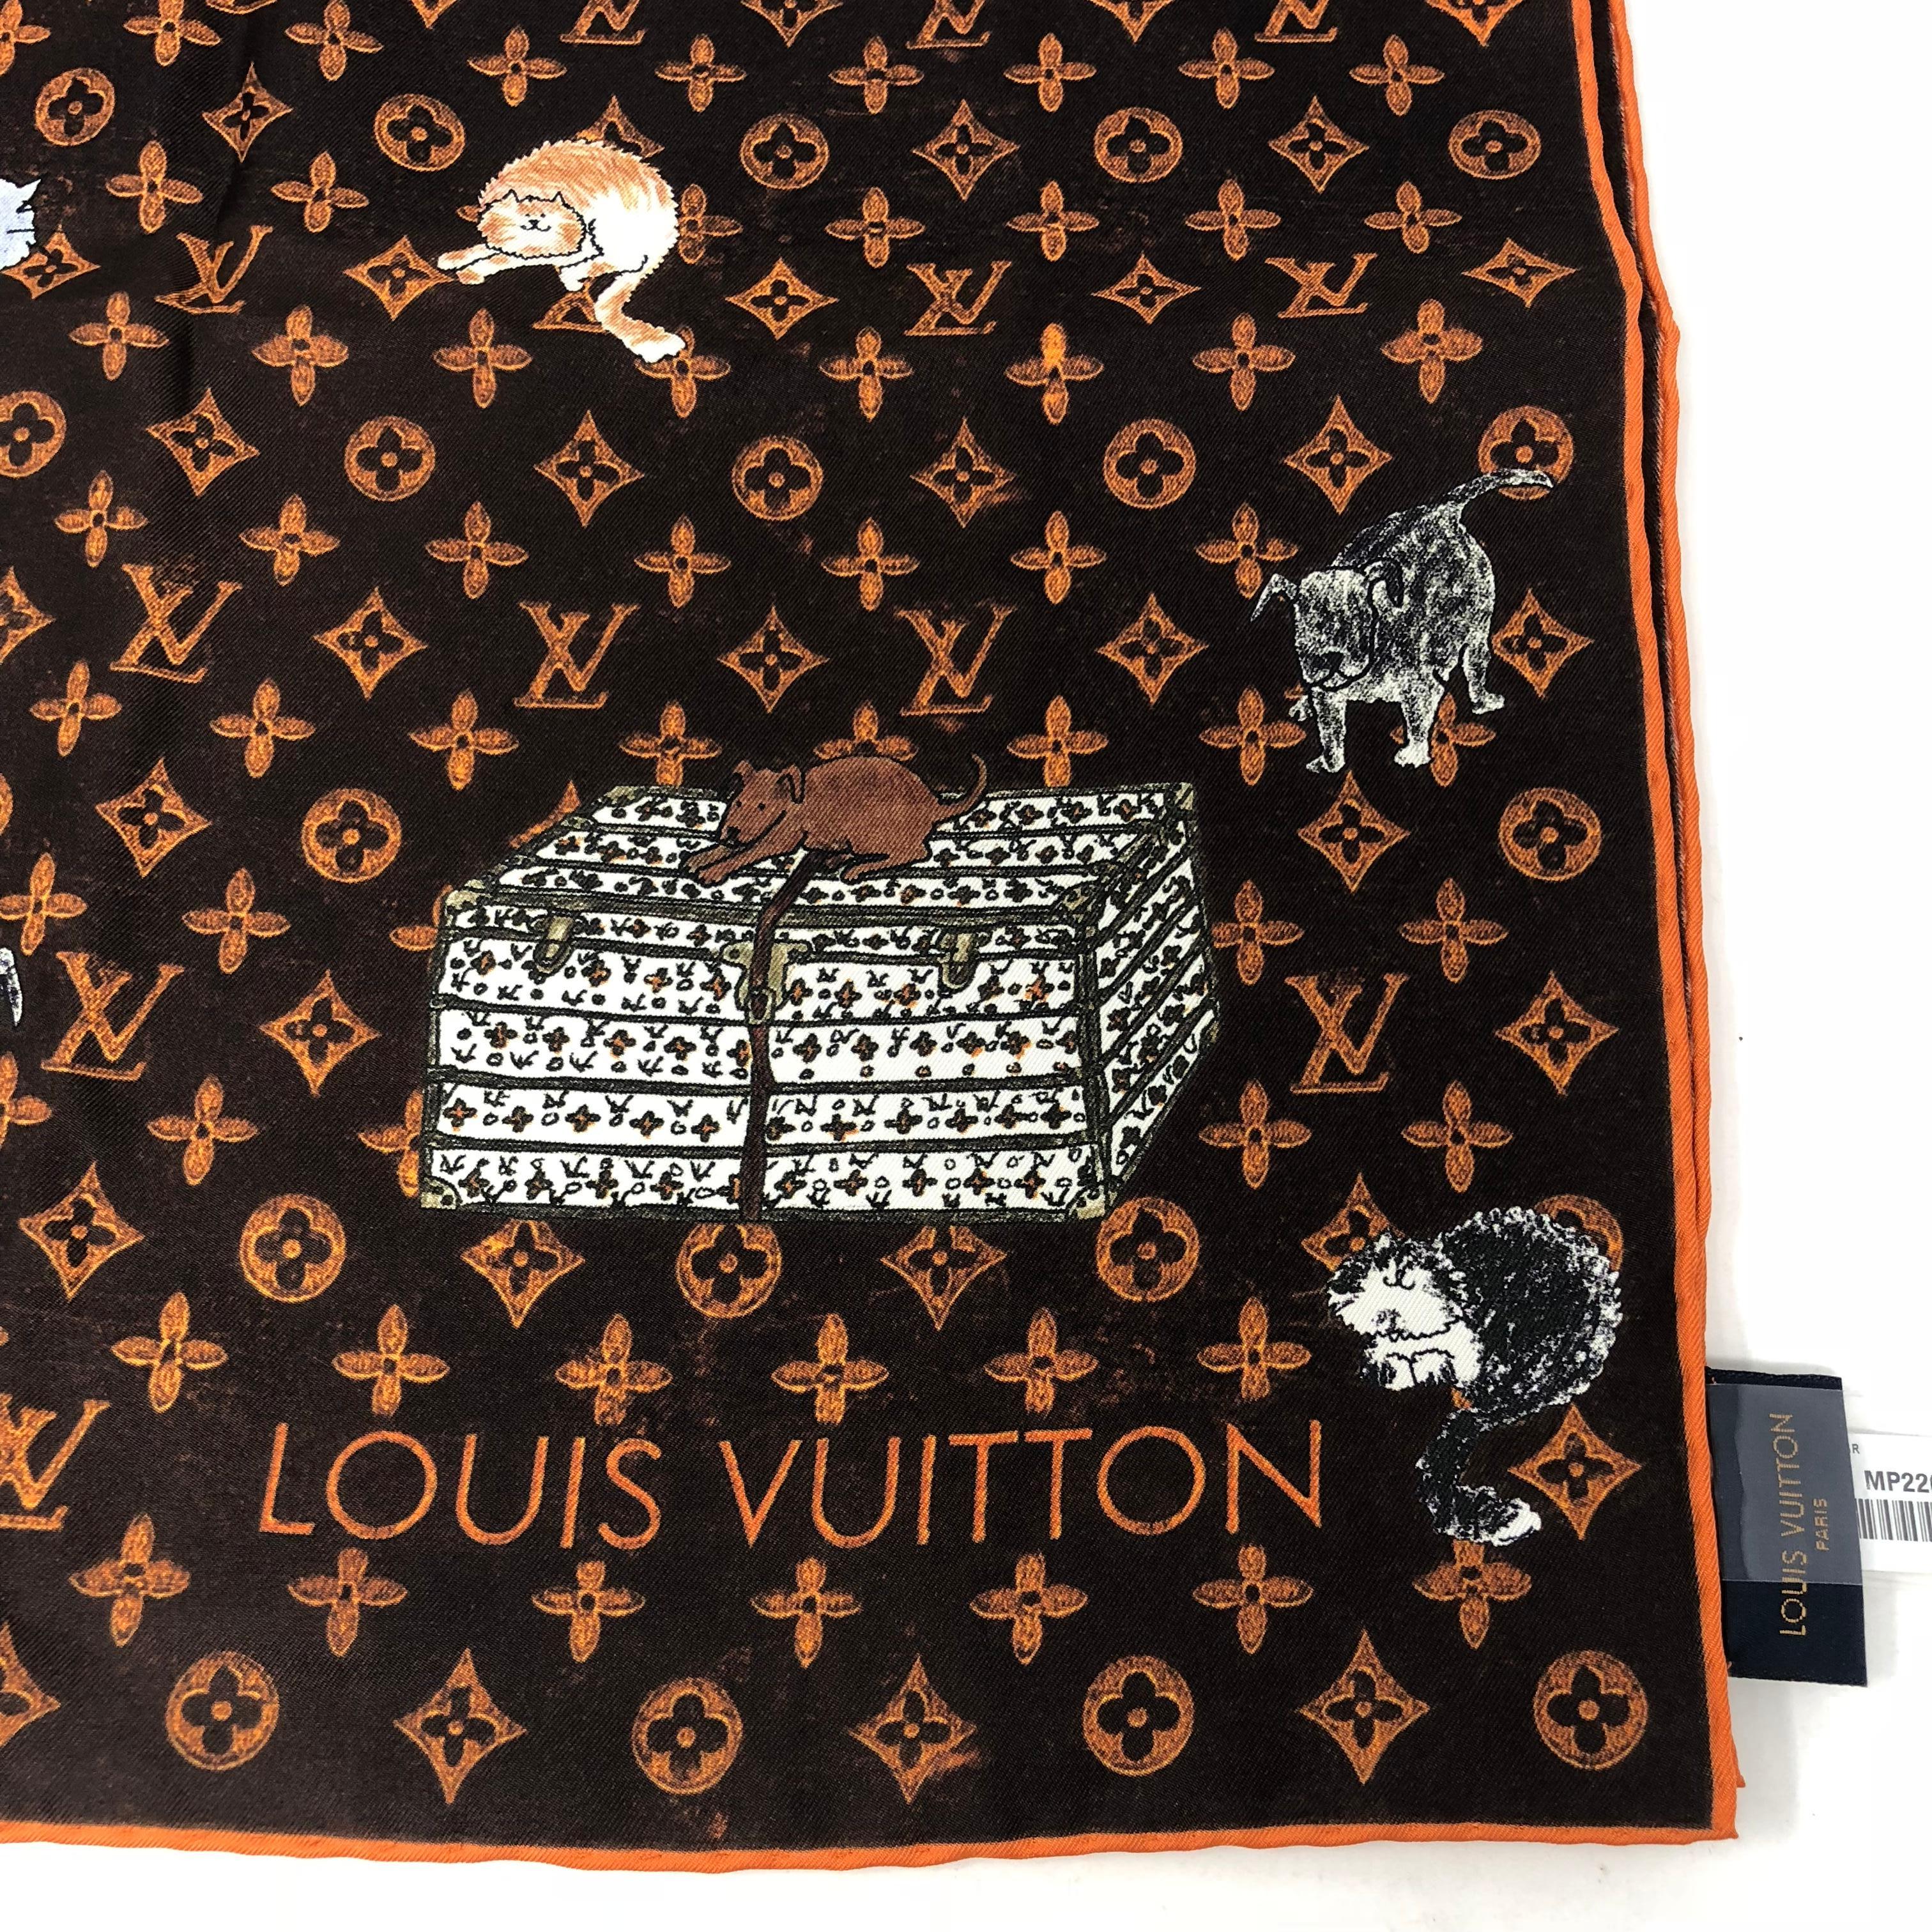 Louis Vuitton Cat Silk Scarf designed by Grace Coddington. The beautiful silk scarf depicts cats for the ultimate animal lover. Limited and sold out. This one is brand new with original box. A fun and quirky design only by LV. Guaranteed authentic. 